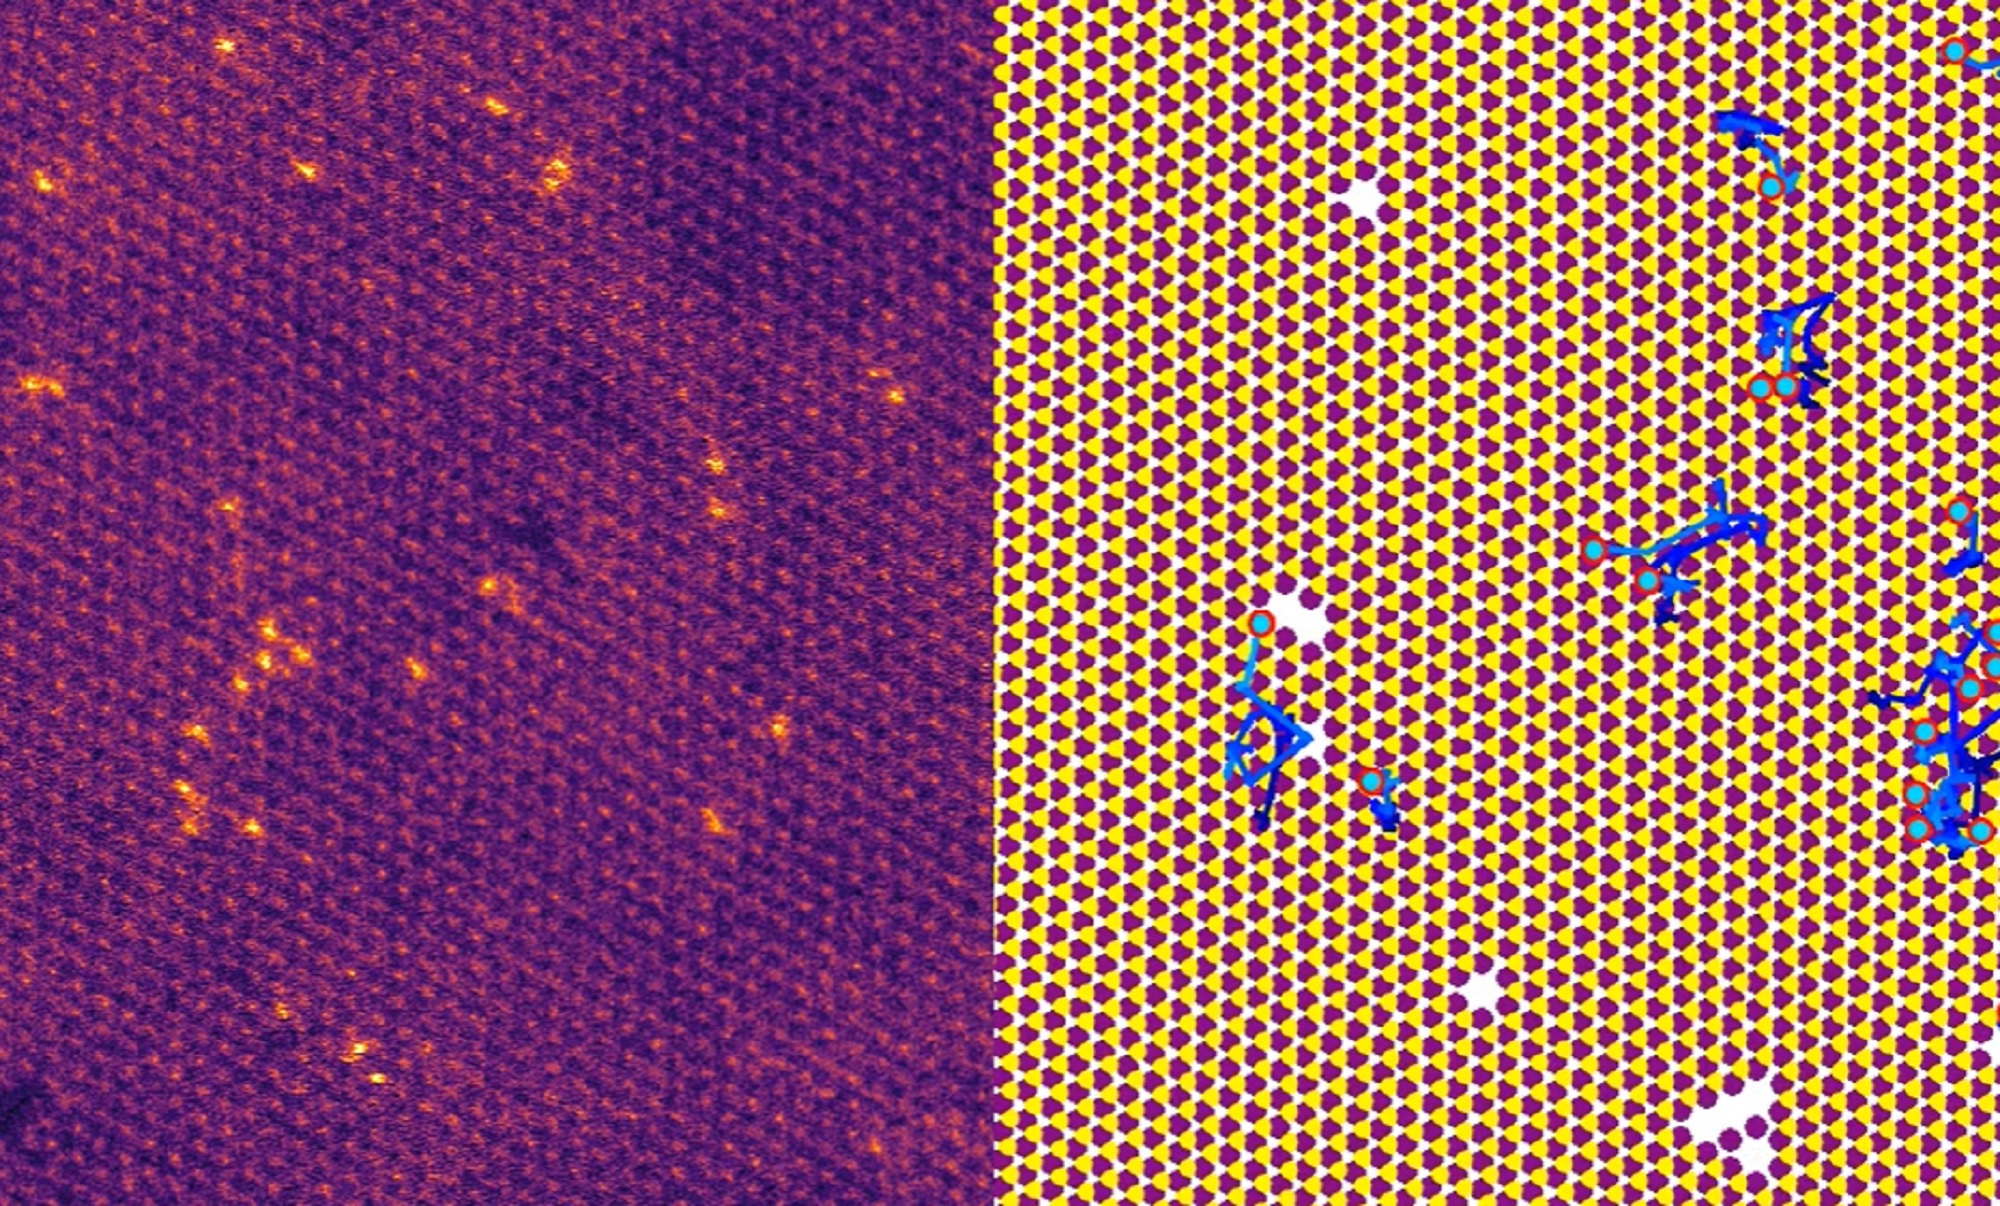 See the first video of solitary solid atoms playing with liquid